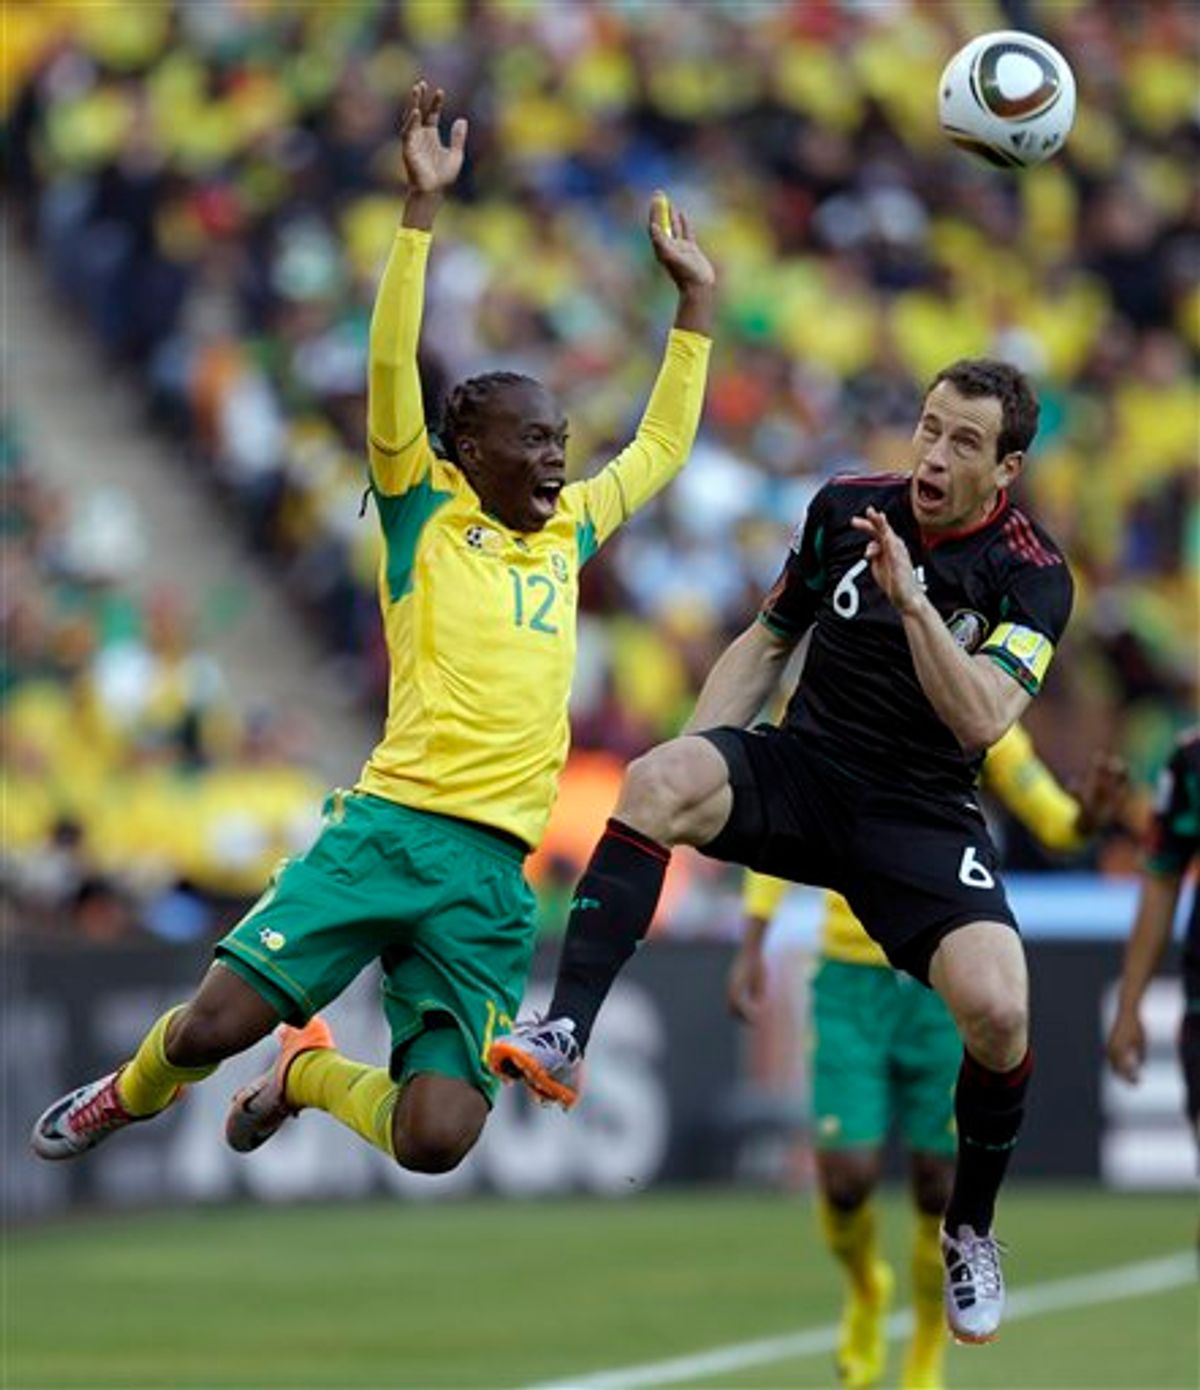 South Africa's Reneilwe Letsholonyane, left, and Mexico's Gerardo Torrado vie for the ball during the World Cup group A soccer match between South Africa and Mexico at Soccer City in Johannesburg, South Africa, on Friday, June 11, 2010. (AP Photo/Themba Hadebe)   (AP)